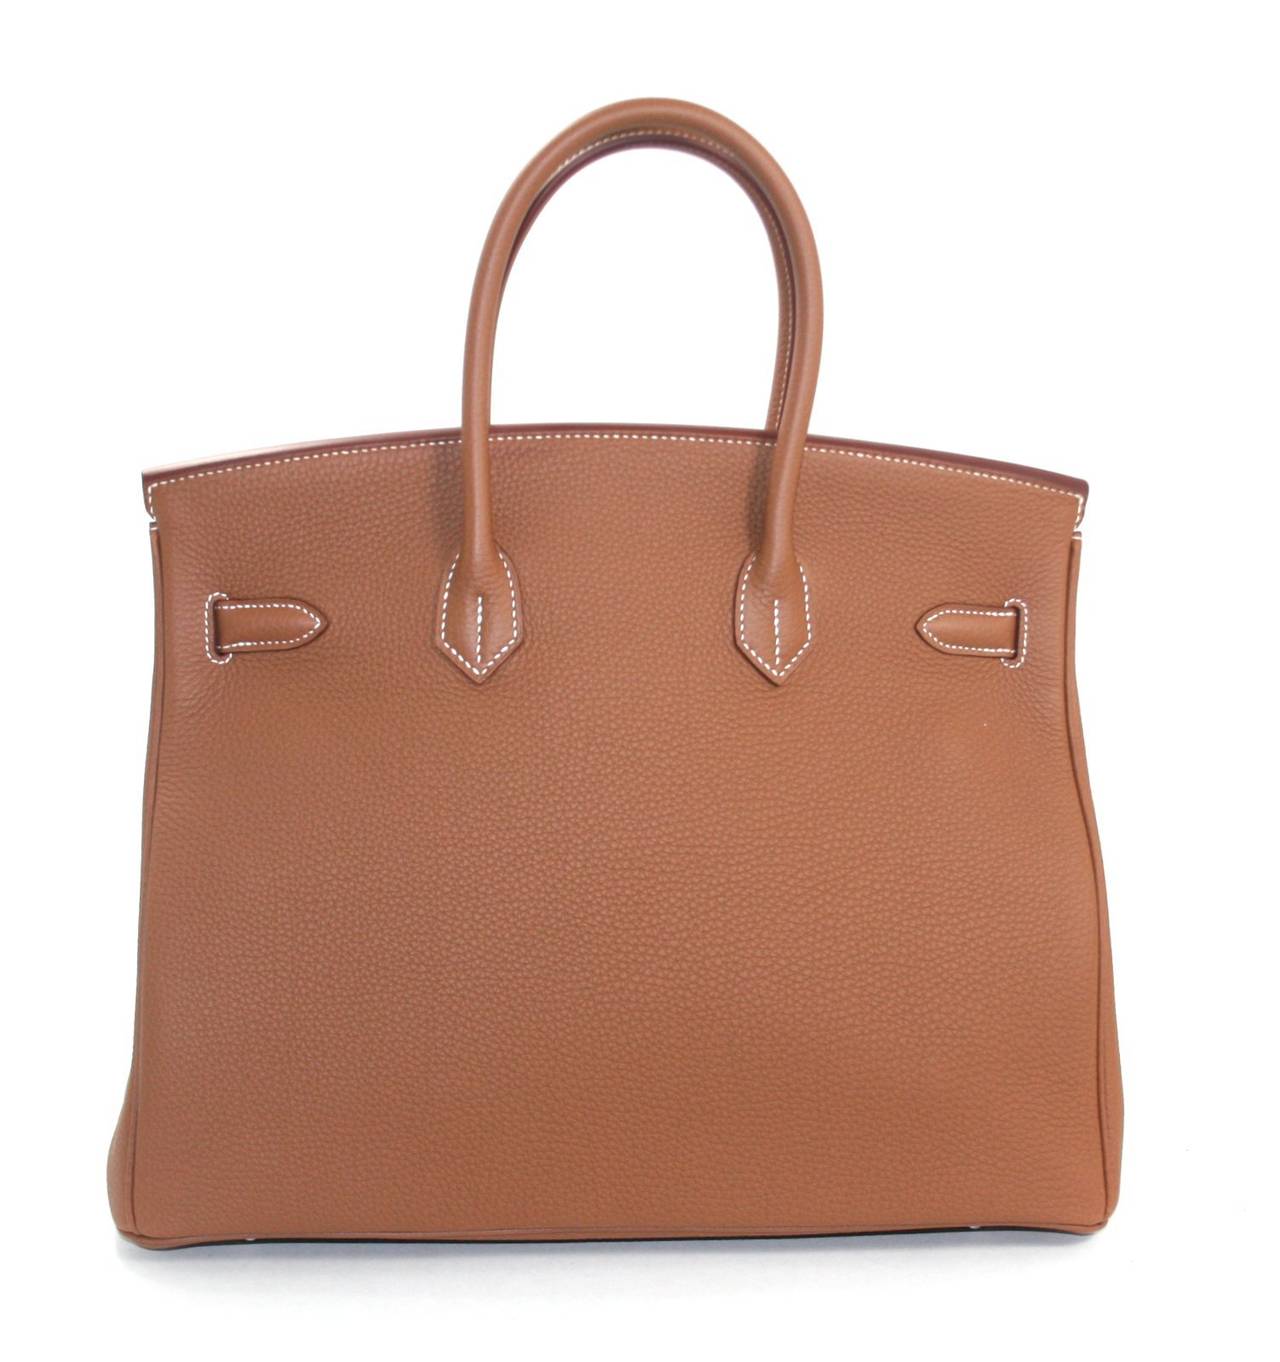 Pristine and unworn, this  Hermès Gold Togo Leather 35 cm Birkin has been carefully stored.  The protective  plastic is still intact on all the hardware.     Considered the ultimate luxury item the world over and hand stitched by skilled craftsmen,